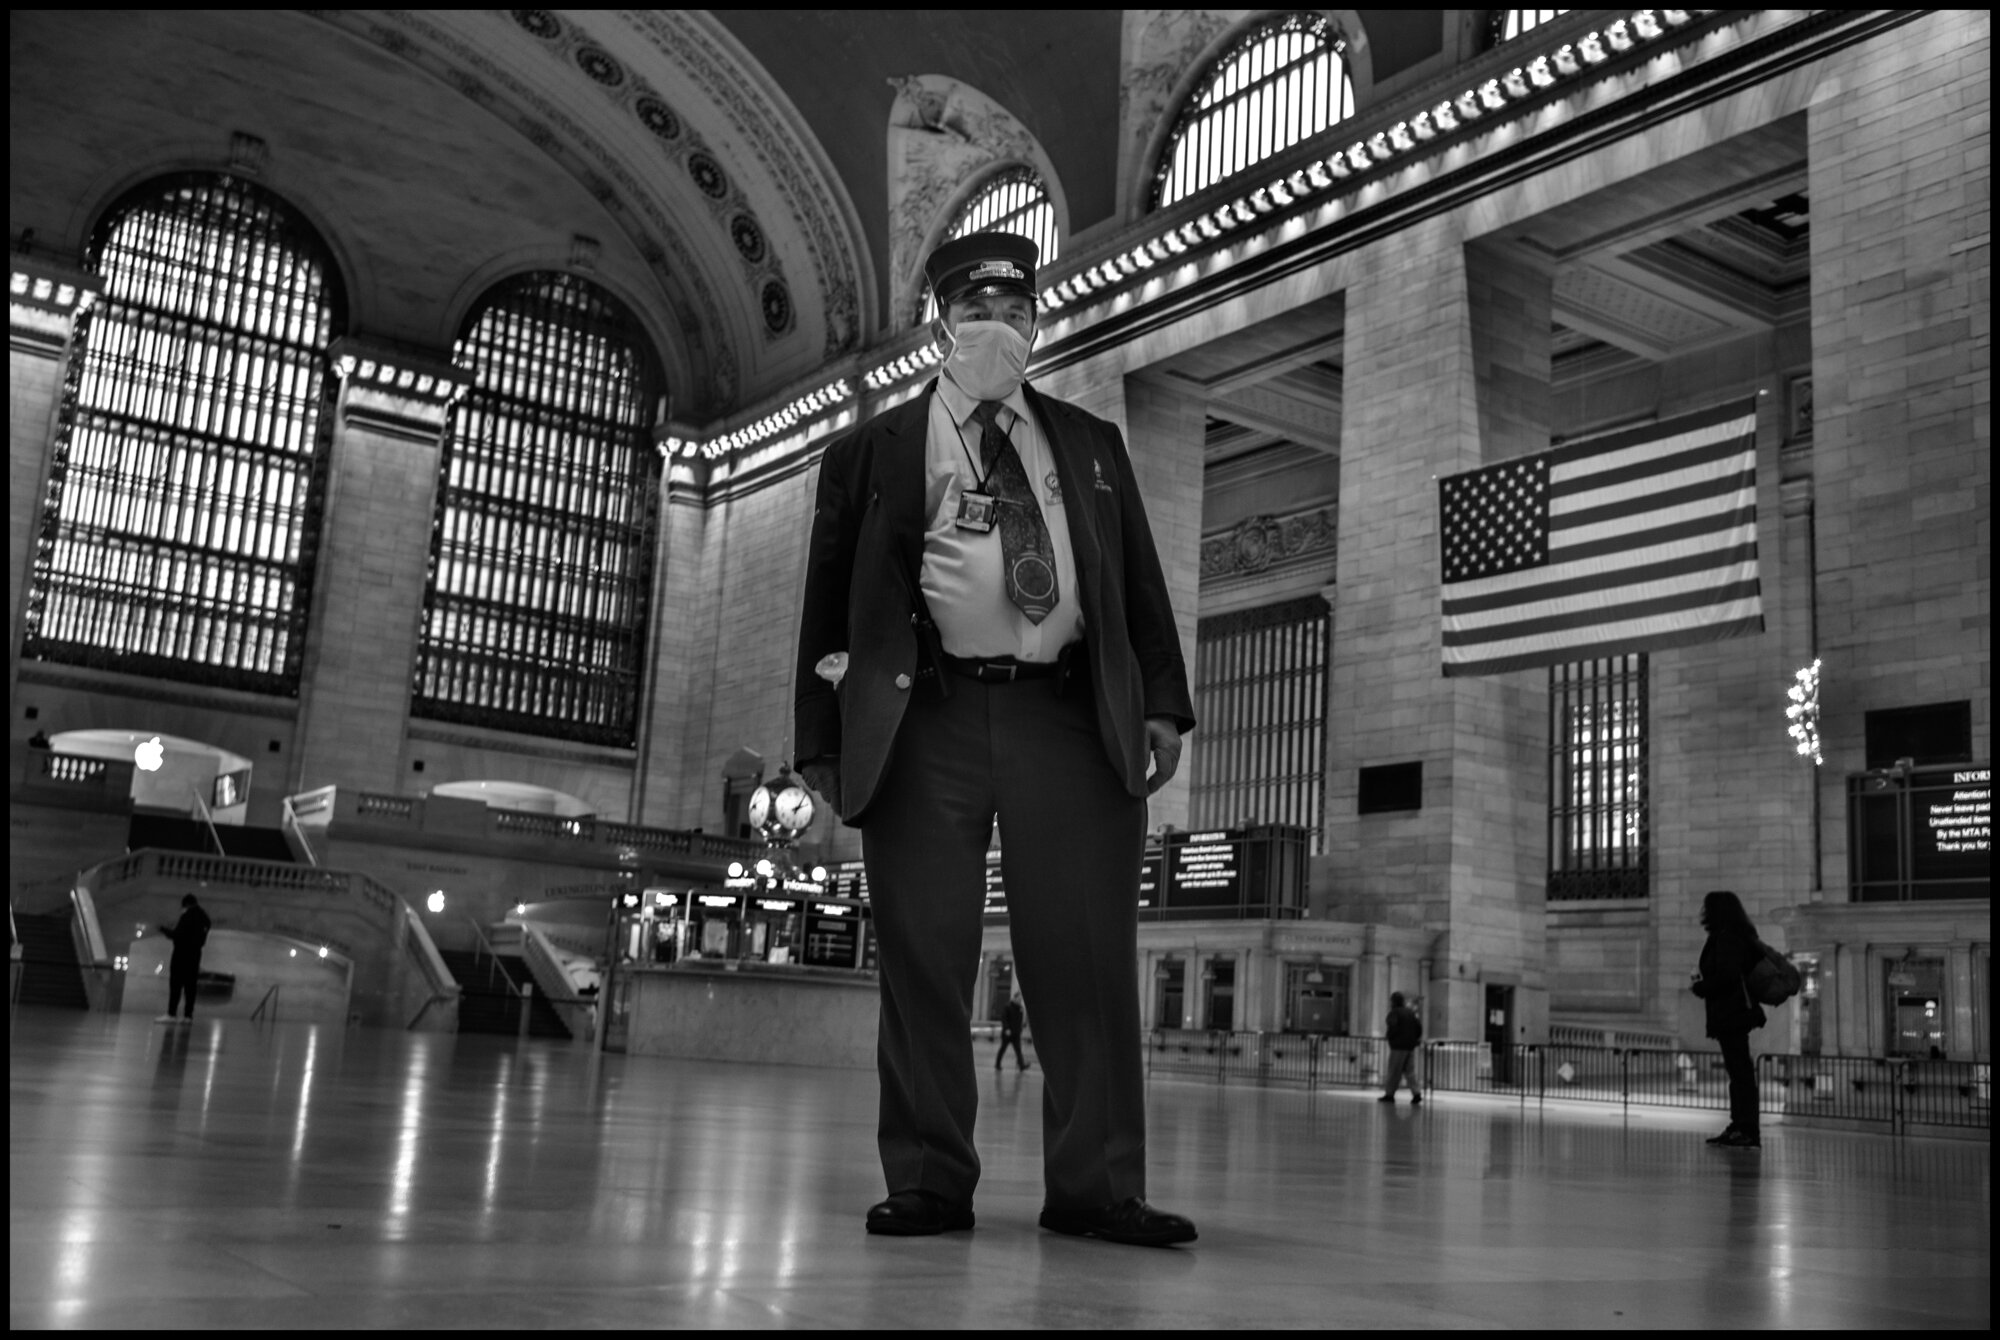  Larry, 57, a customer service worker for Metro North, with 28 years on the job, stood alone in the main Hall. He travels each day 4 hours to and from Connecticut for his job. “It’s been a ghost town since the beginning if this. I ride like I always 